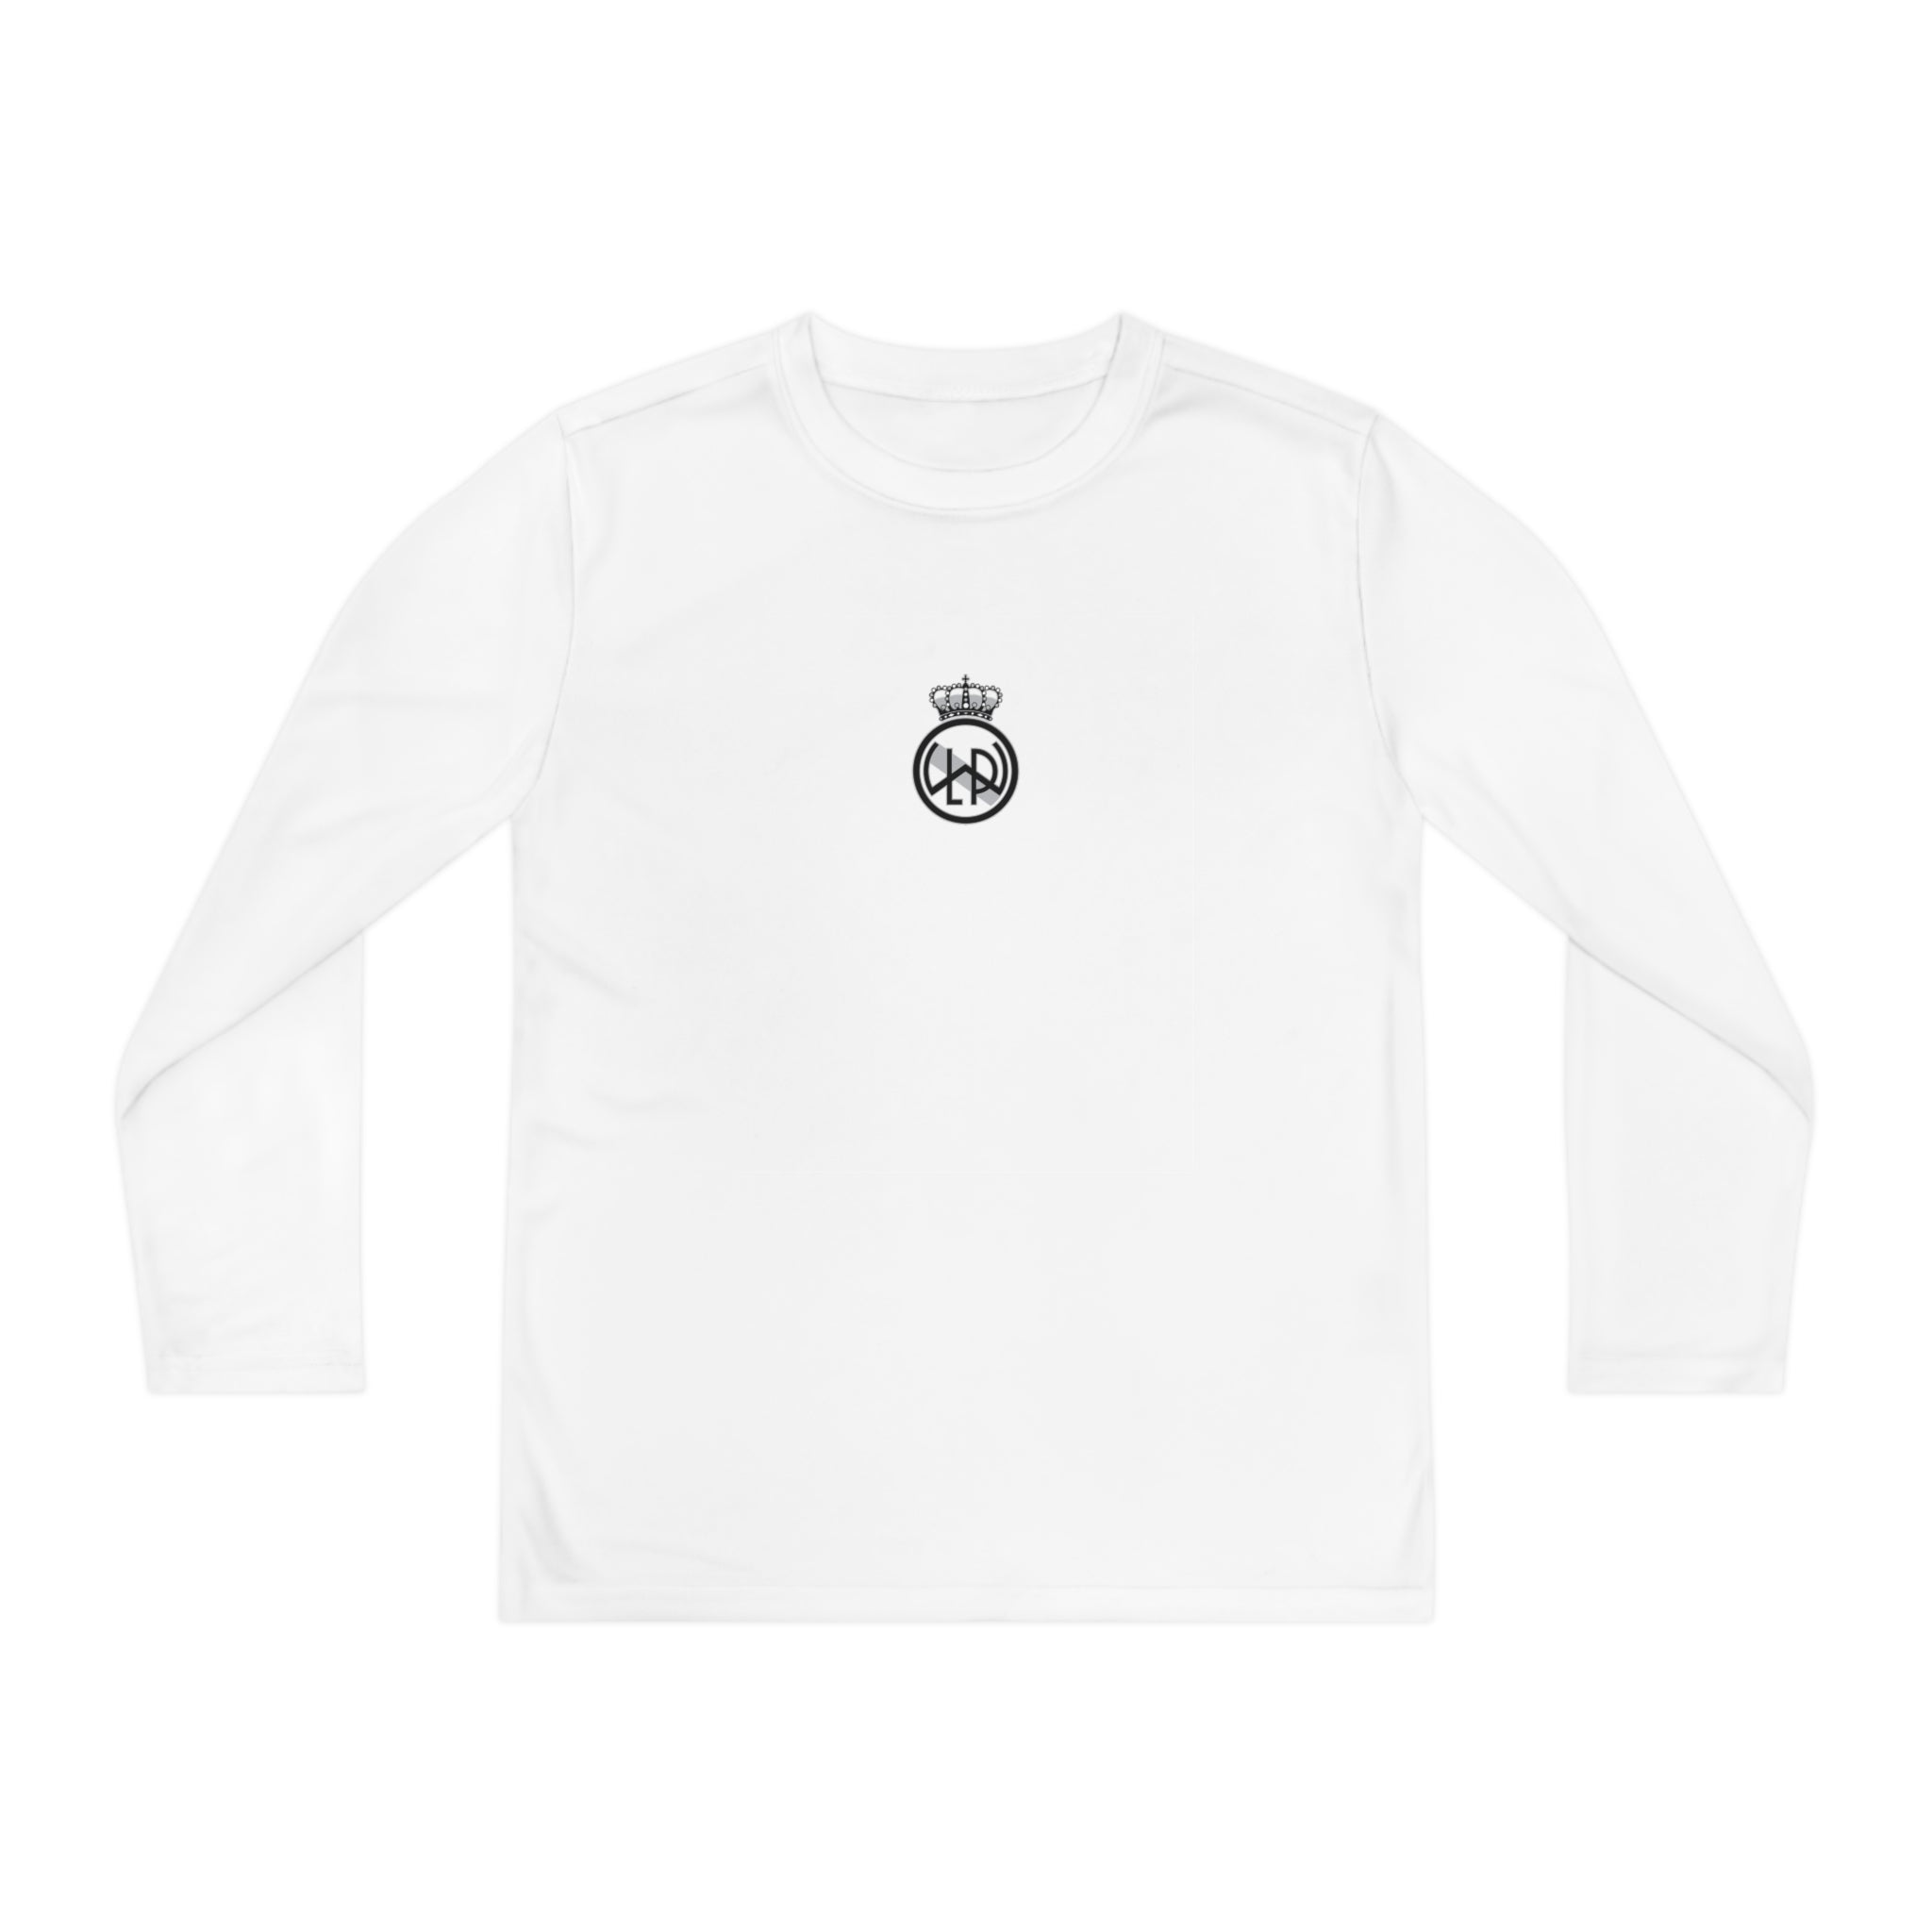 LWPFC Wick-A-Way Competitor Tee